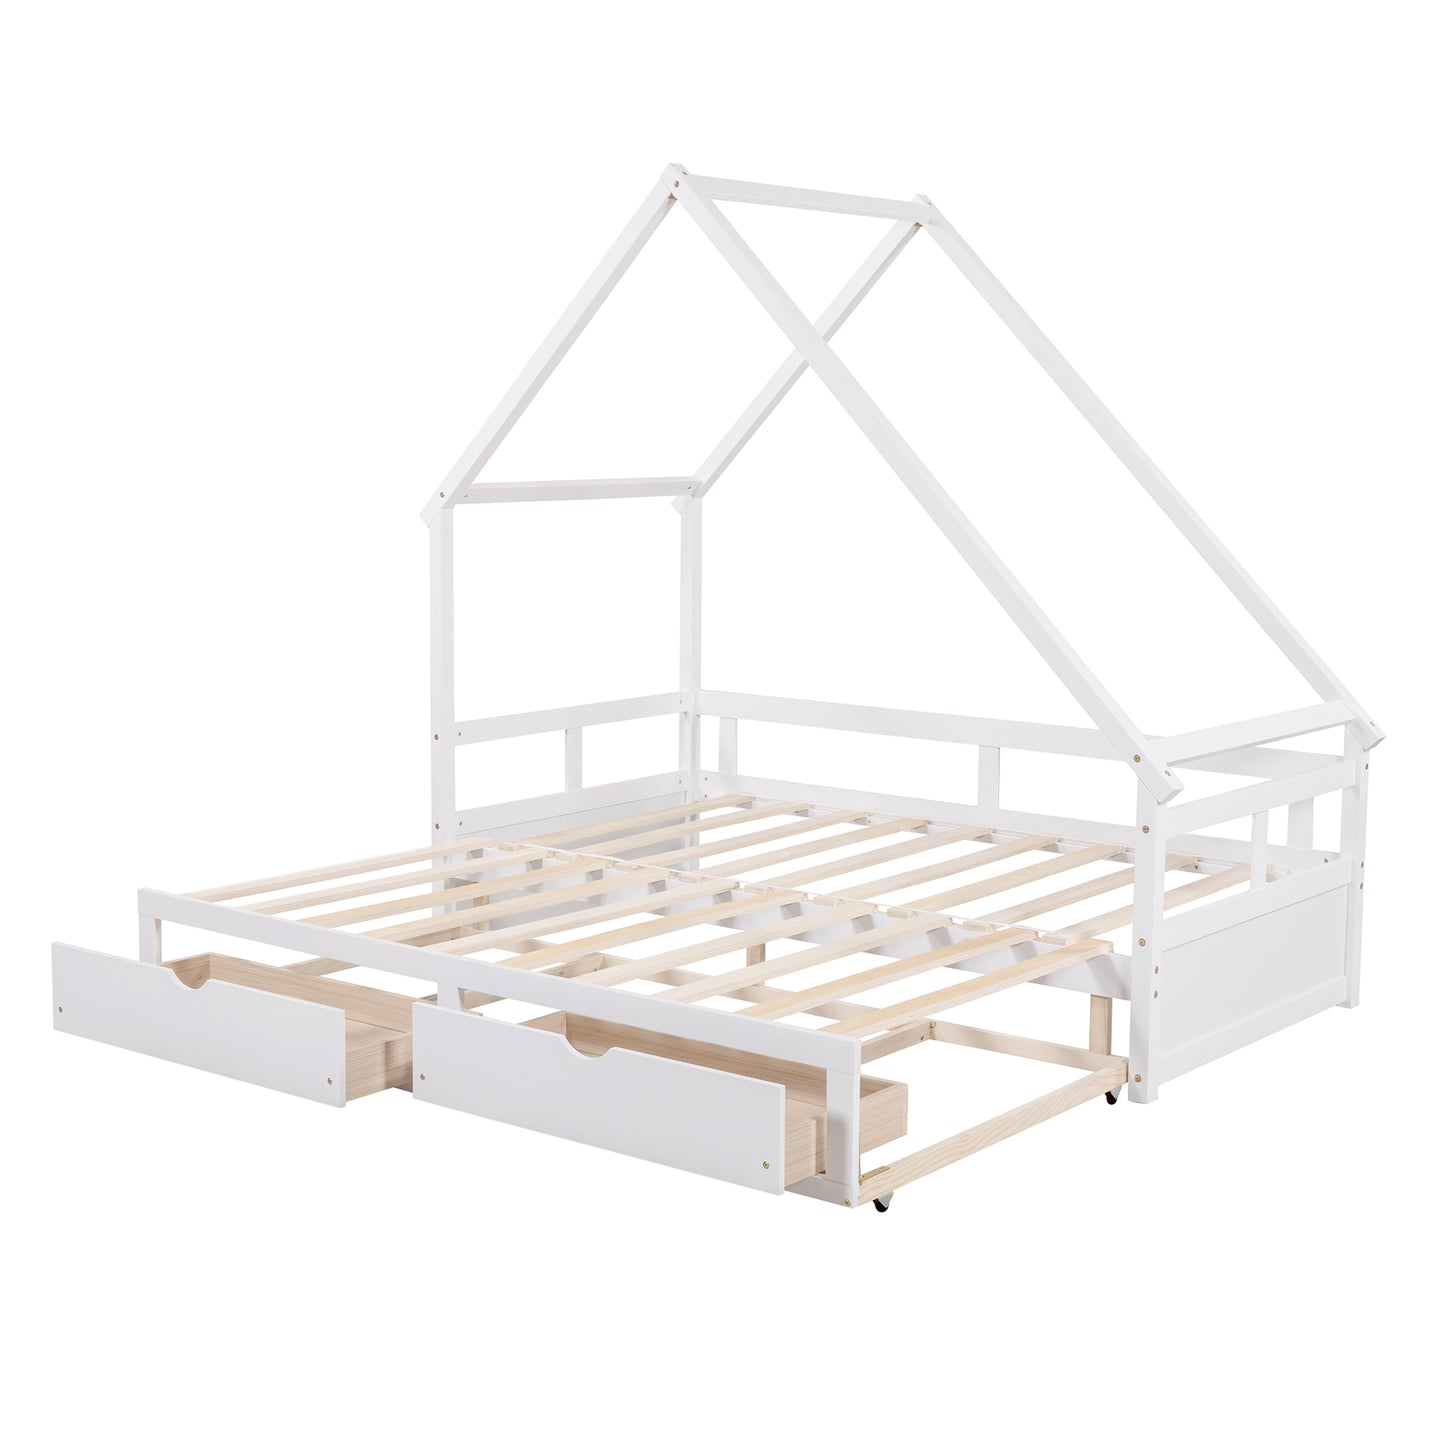 Extending Daybed with Two Drawers, Wooden House Bed with Drawers, White